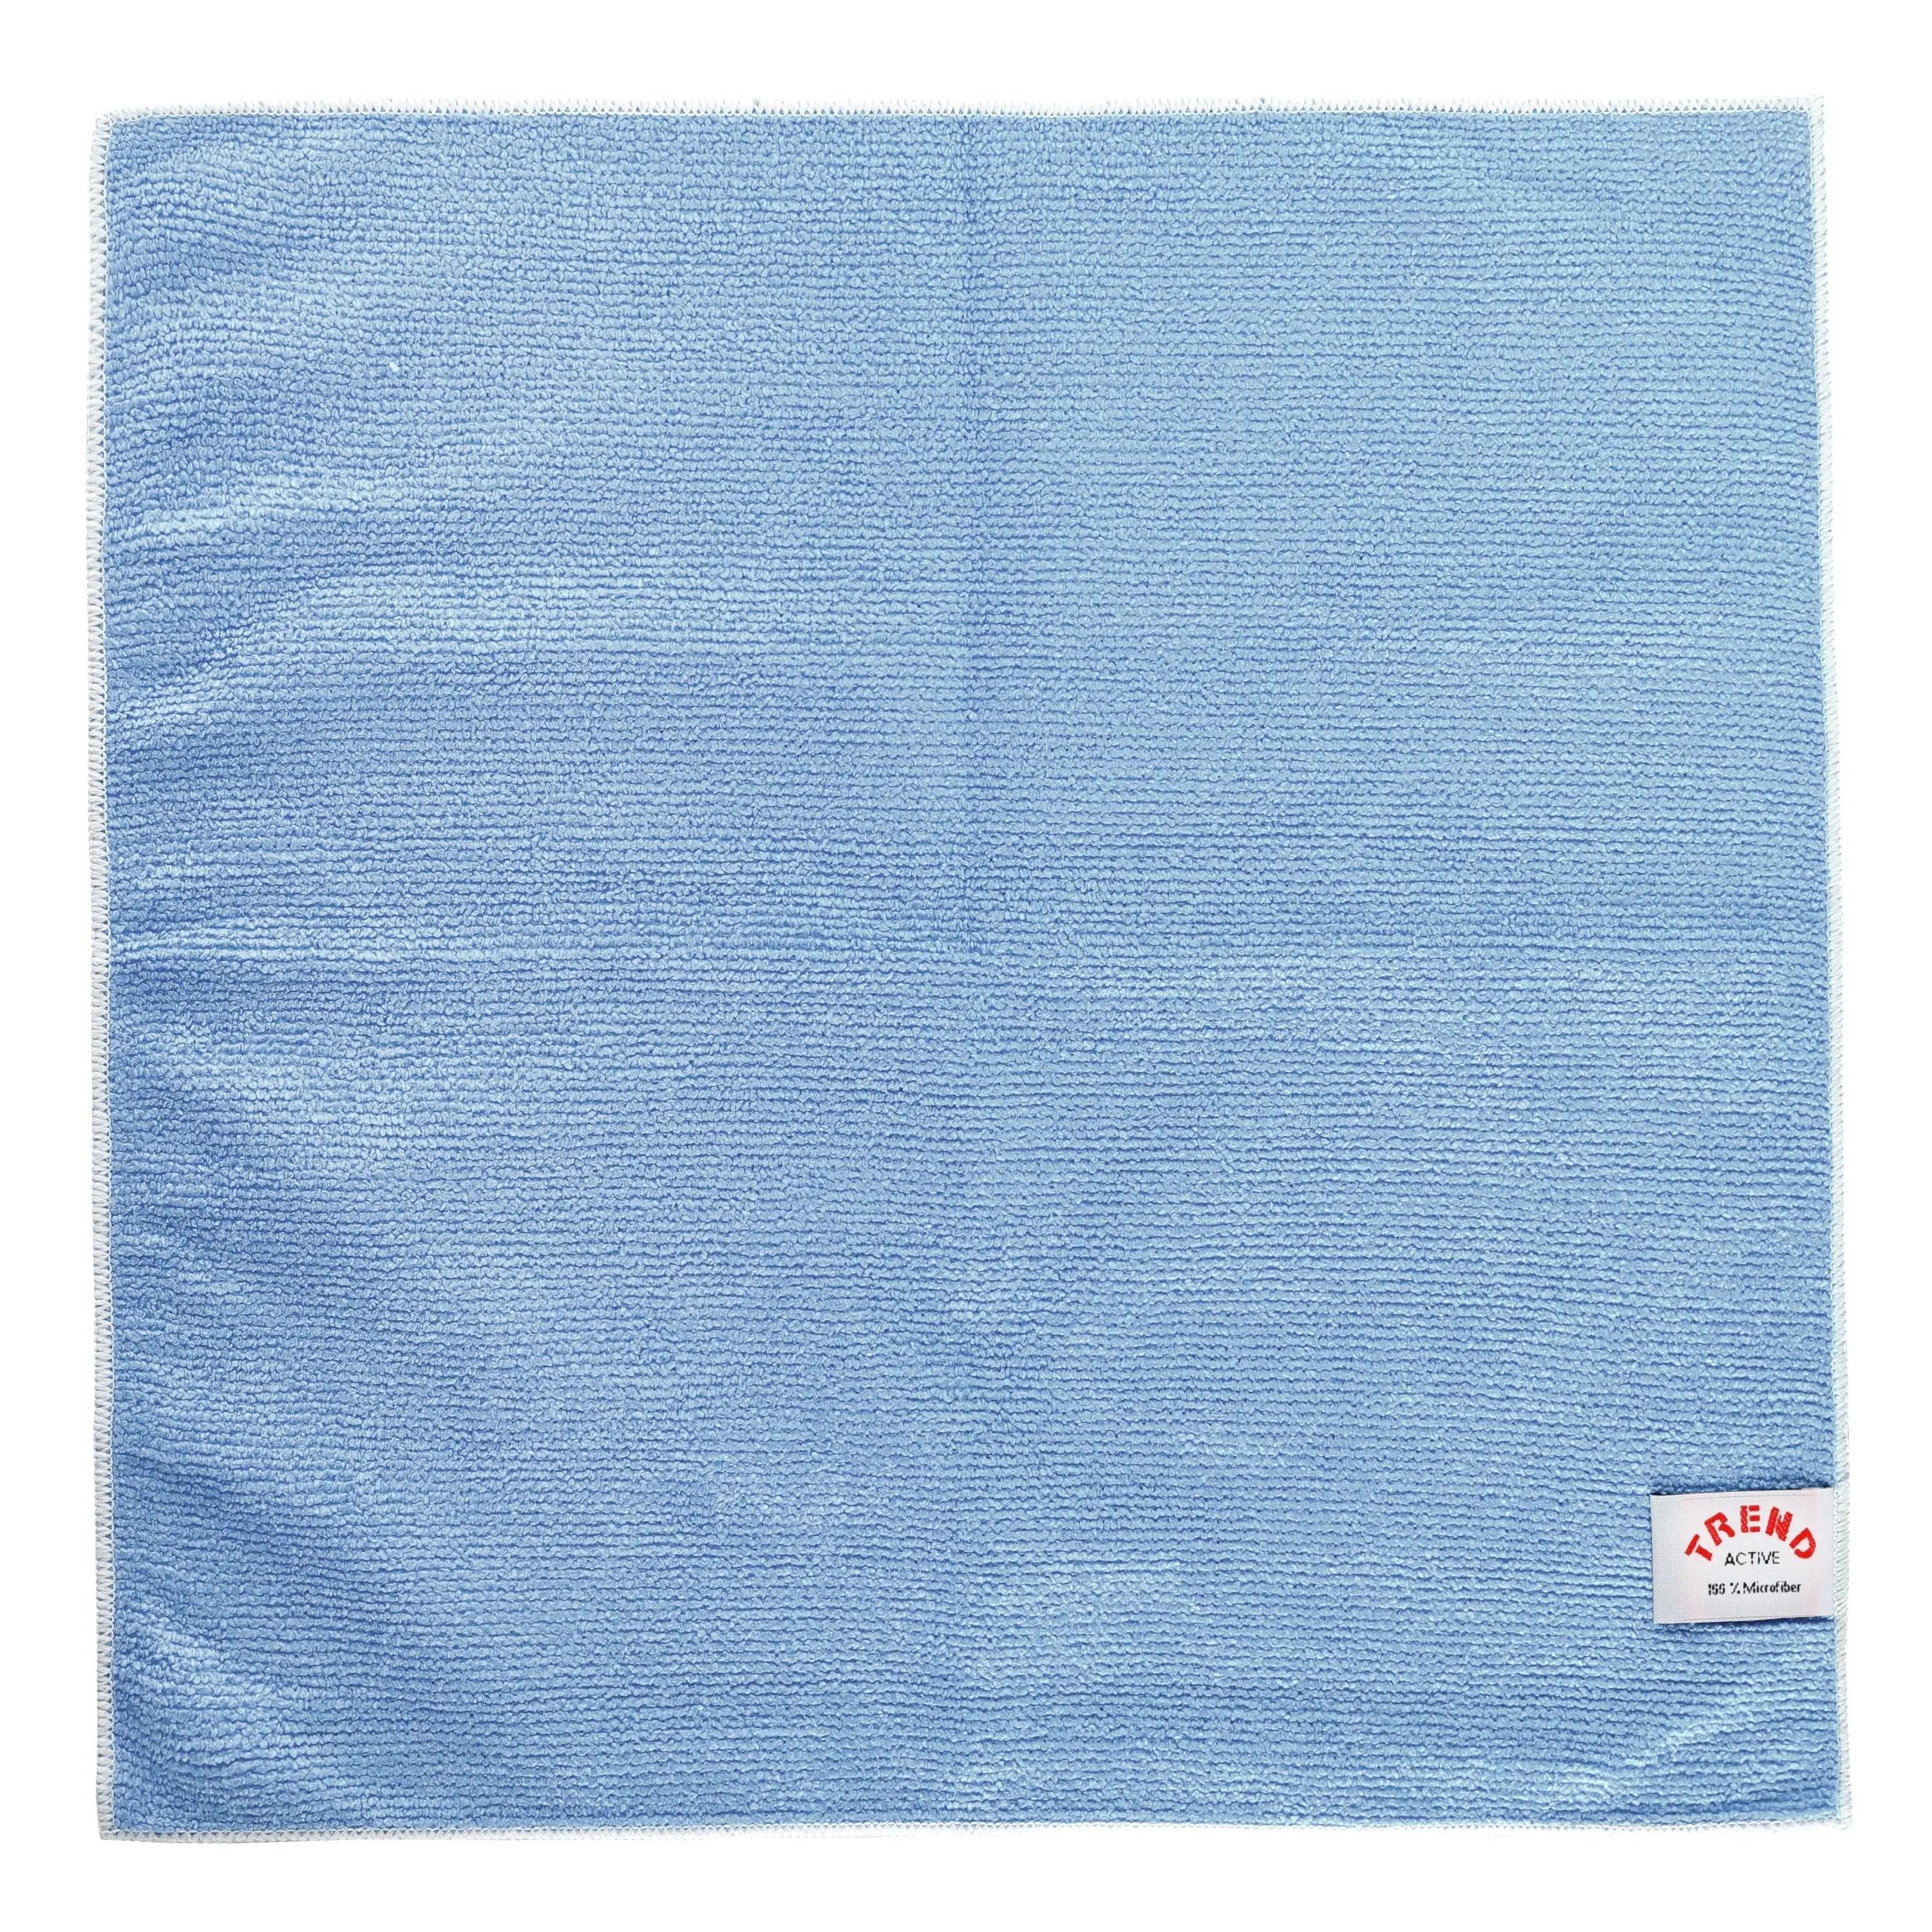 TREND Active Manufaktur Microfaser Wundertuch - blau - TREND Products AT